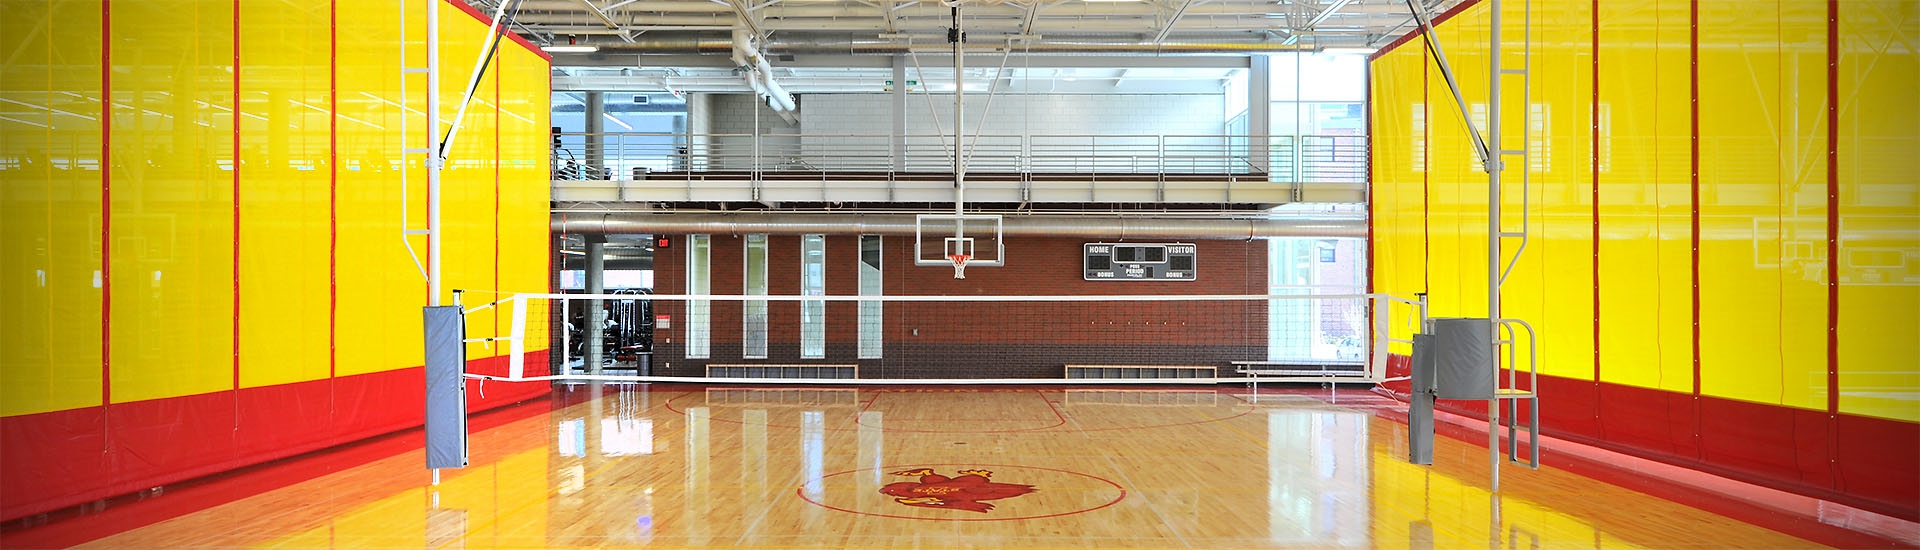 OVERHEAD VOLLEYBALL SYSTEM, GYM DIVIDERS, BASKETBALL BACKSTOPS | Iowa State University